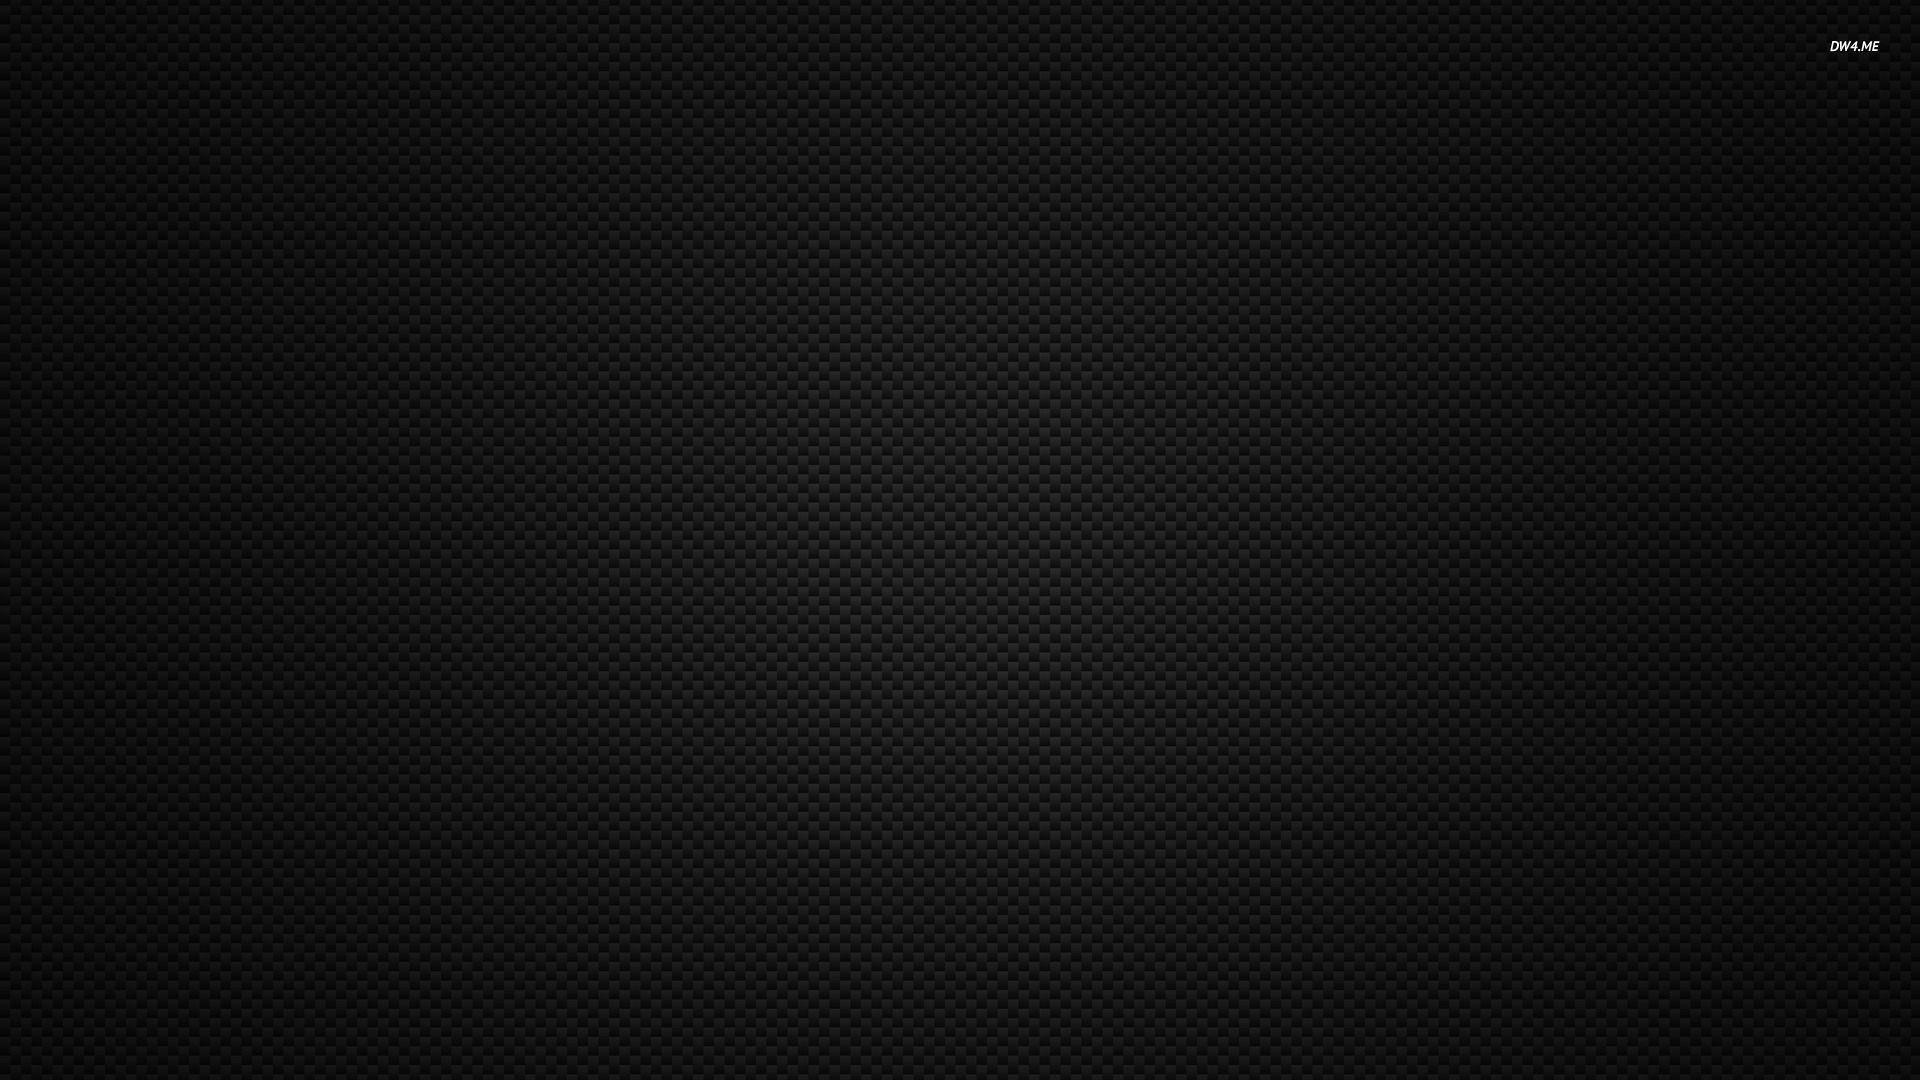 Wallpapers For > Black Carbon Fiber Wallpapers Hd